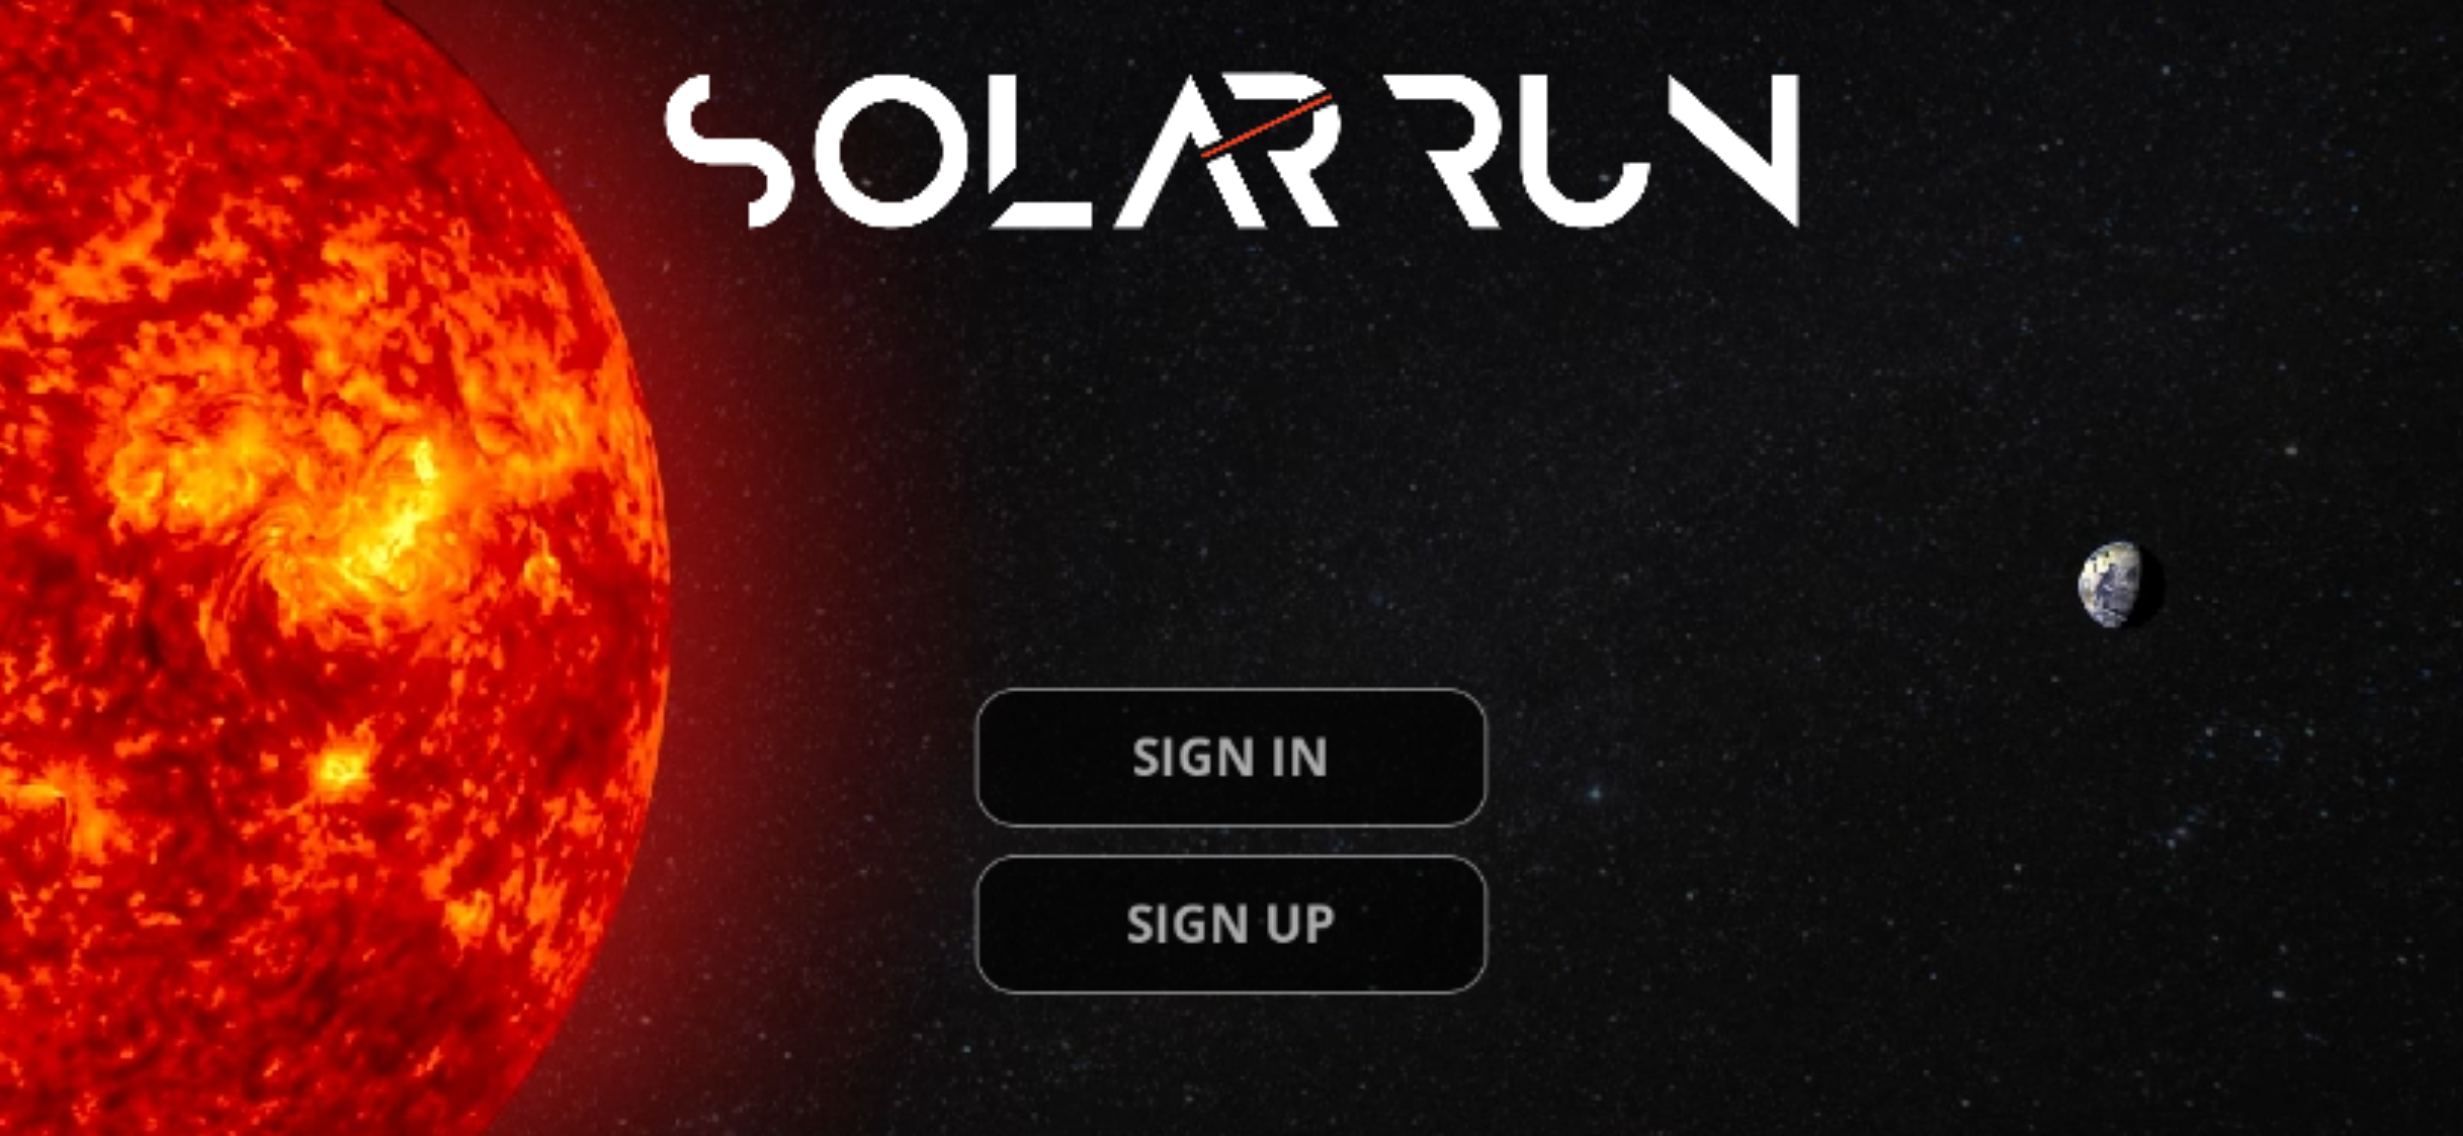 The home screen for the autorunner game. The background is a 3D representation of space, with the sun on the left side and the Earth on the right side. White stars intermittendlty litter the space between them. The text 'SOLAR RUN' sits at the top of the screen, and two buttons reading 'Sign in' and 'Sign up' sit at the bottom.